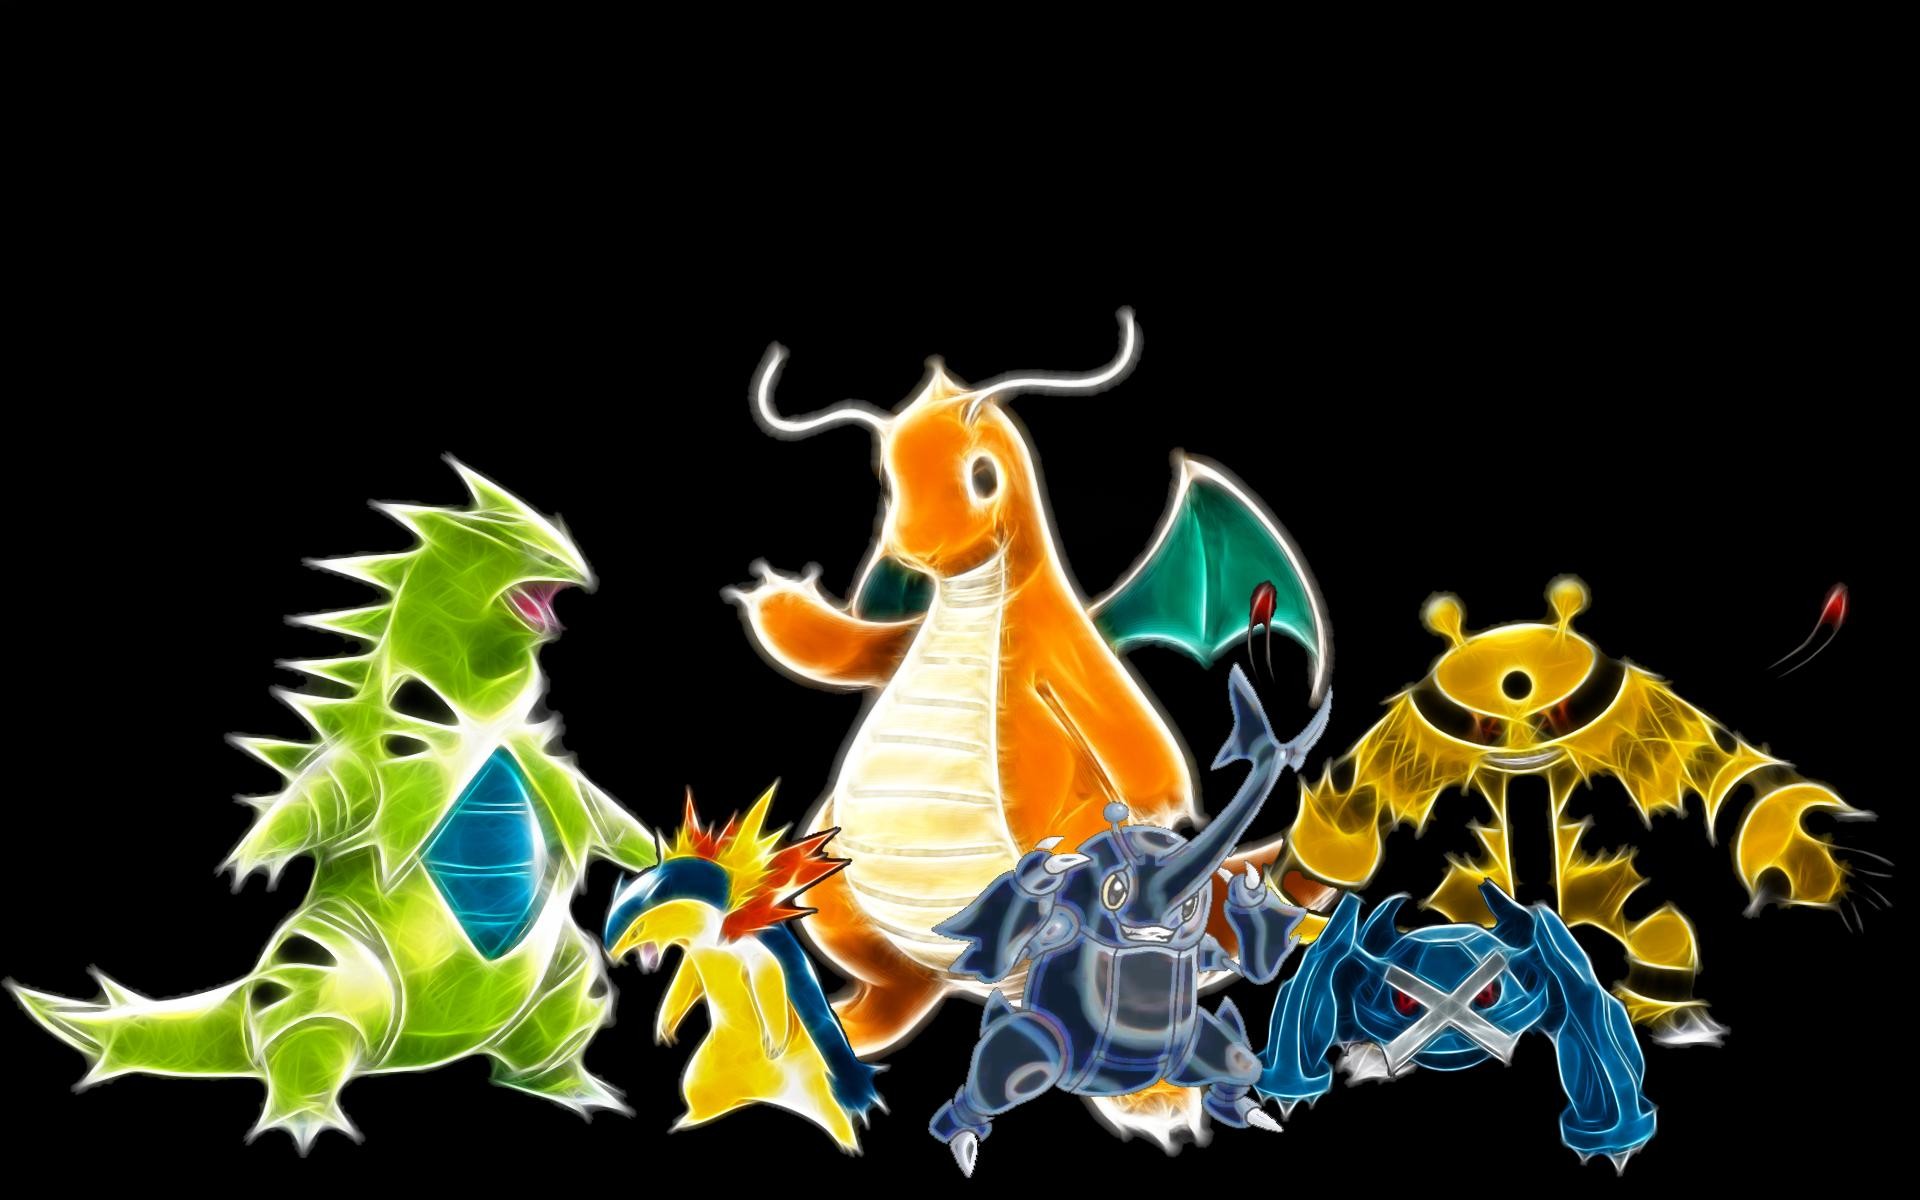 1920x1200 ... Taking request for Pokemon wallpapers, these areIve already